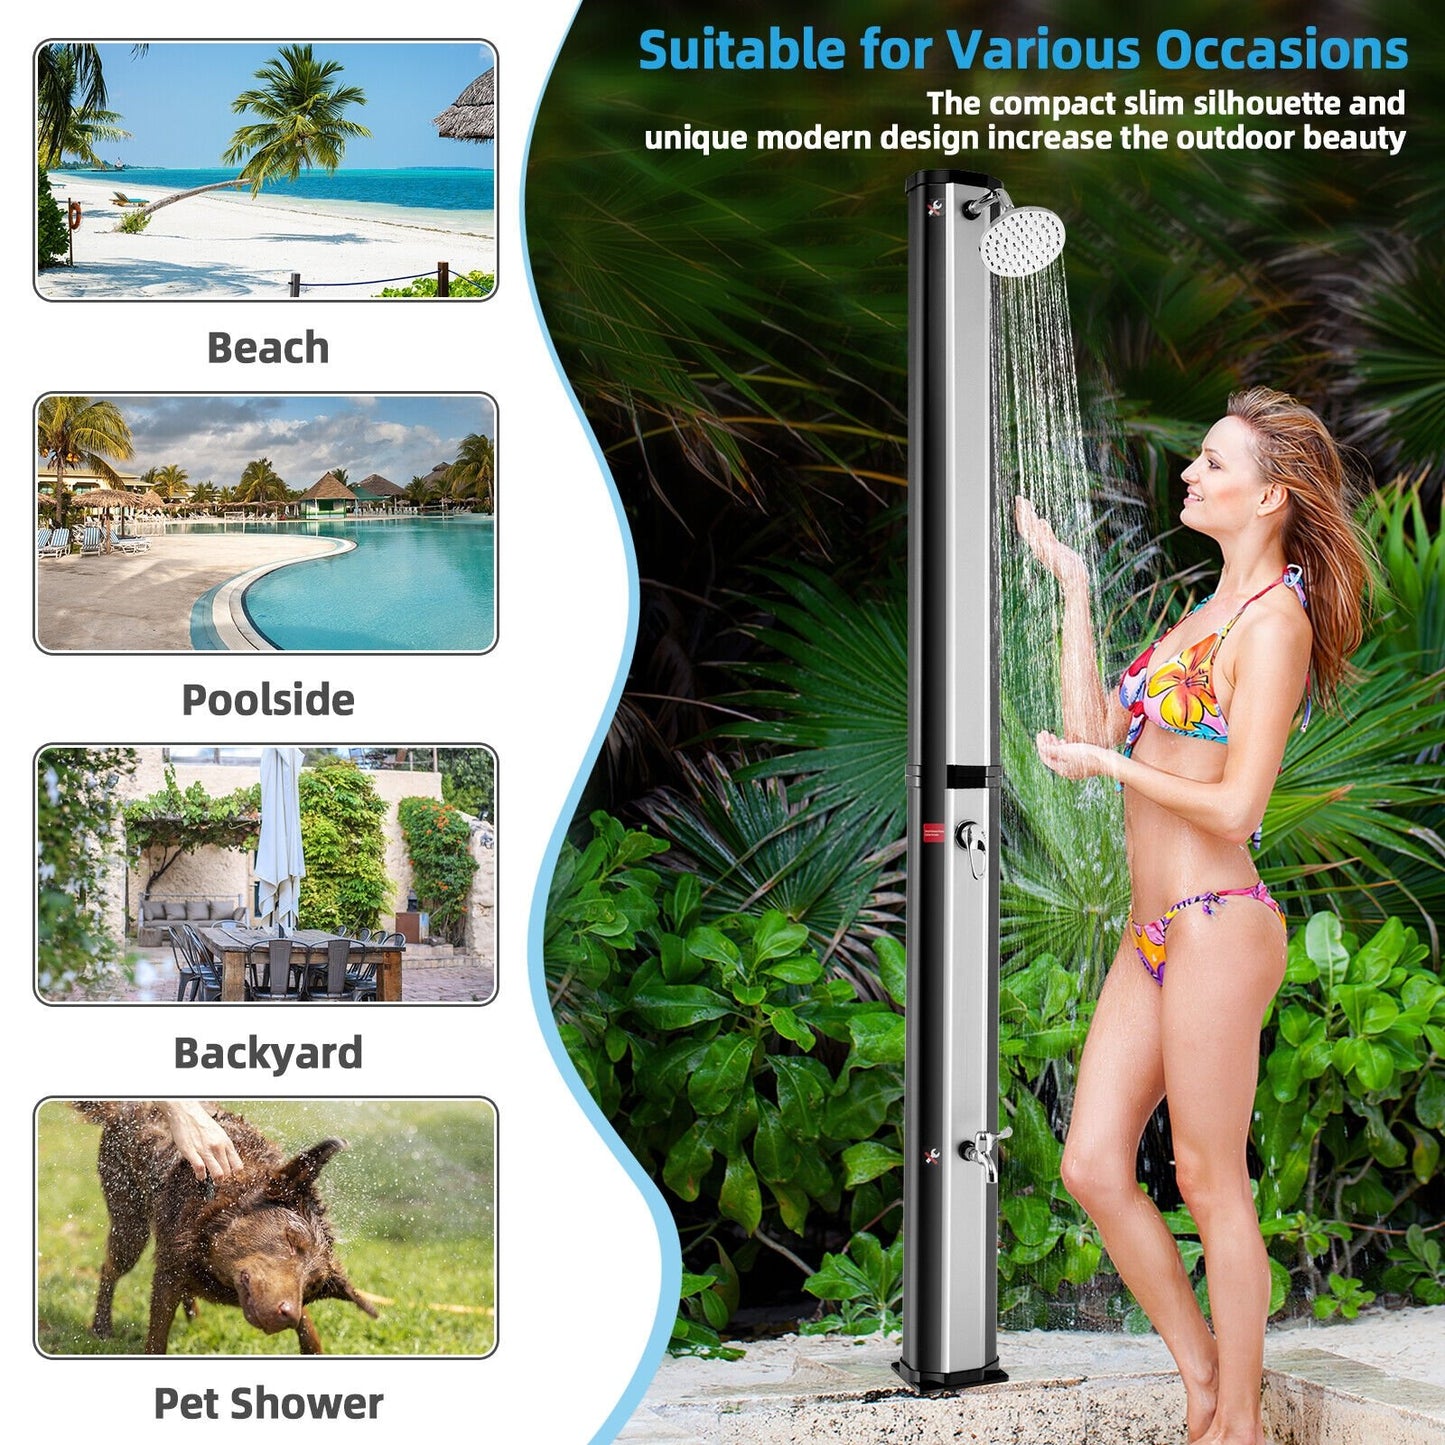 7.2 Feet 9.3 Gallon Solar Heated Shower with Adjustable Head and Foot Tap, Black